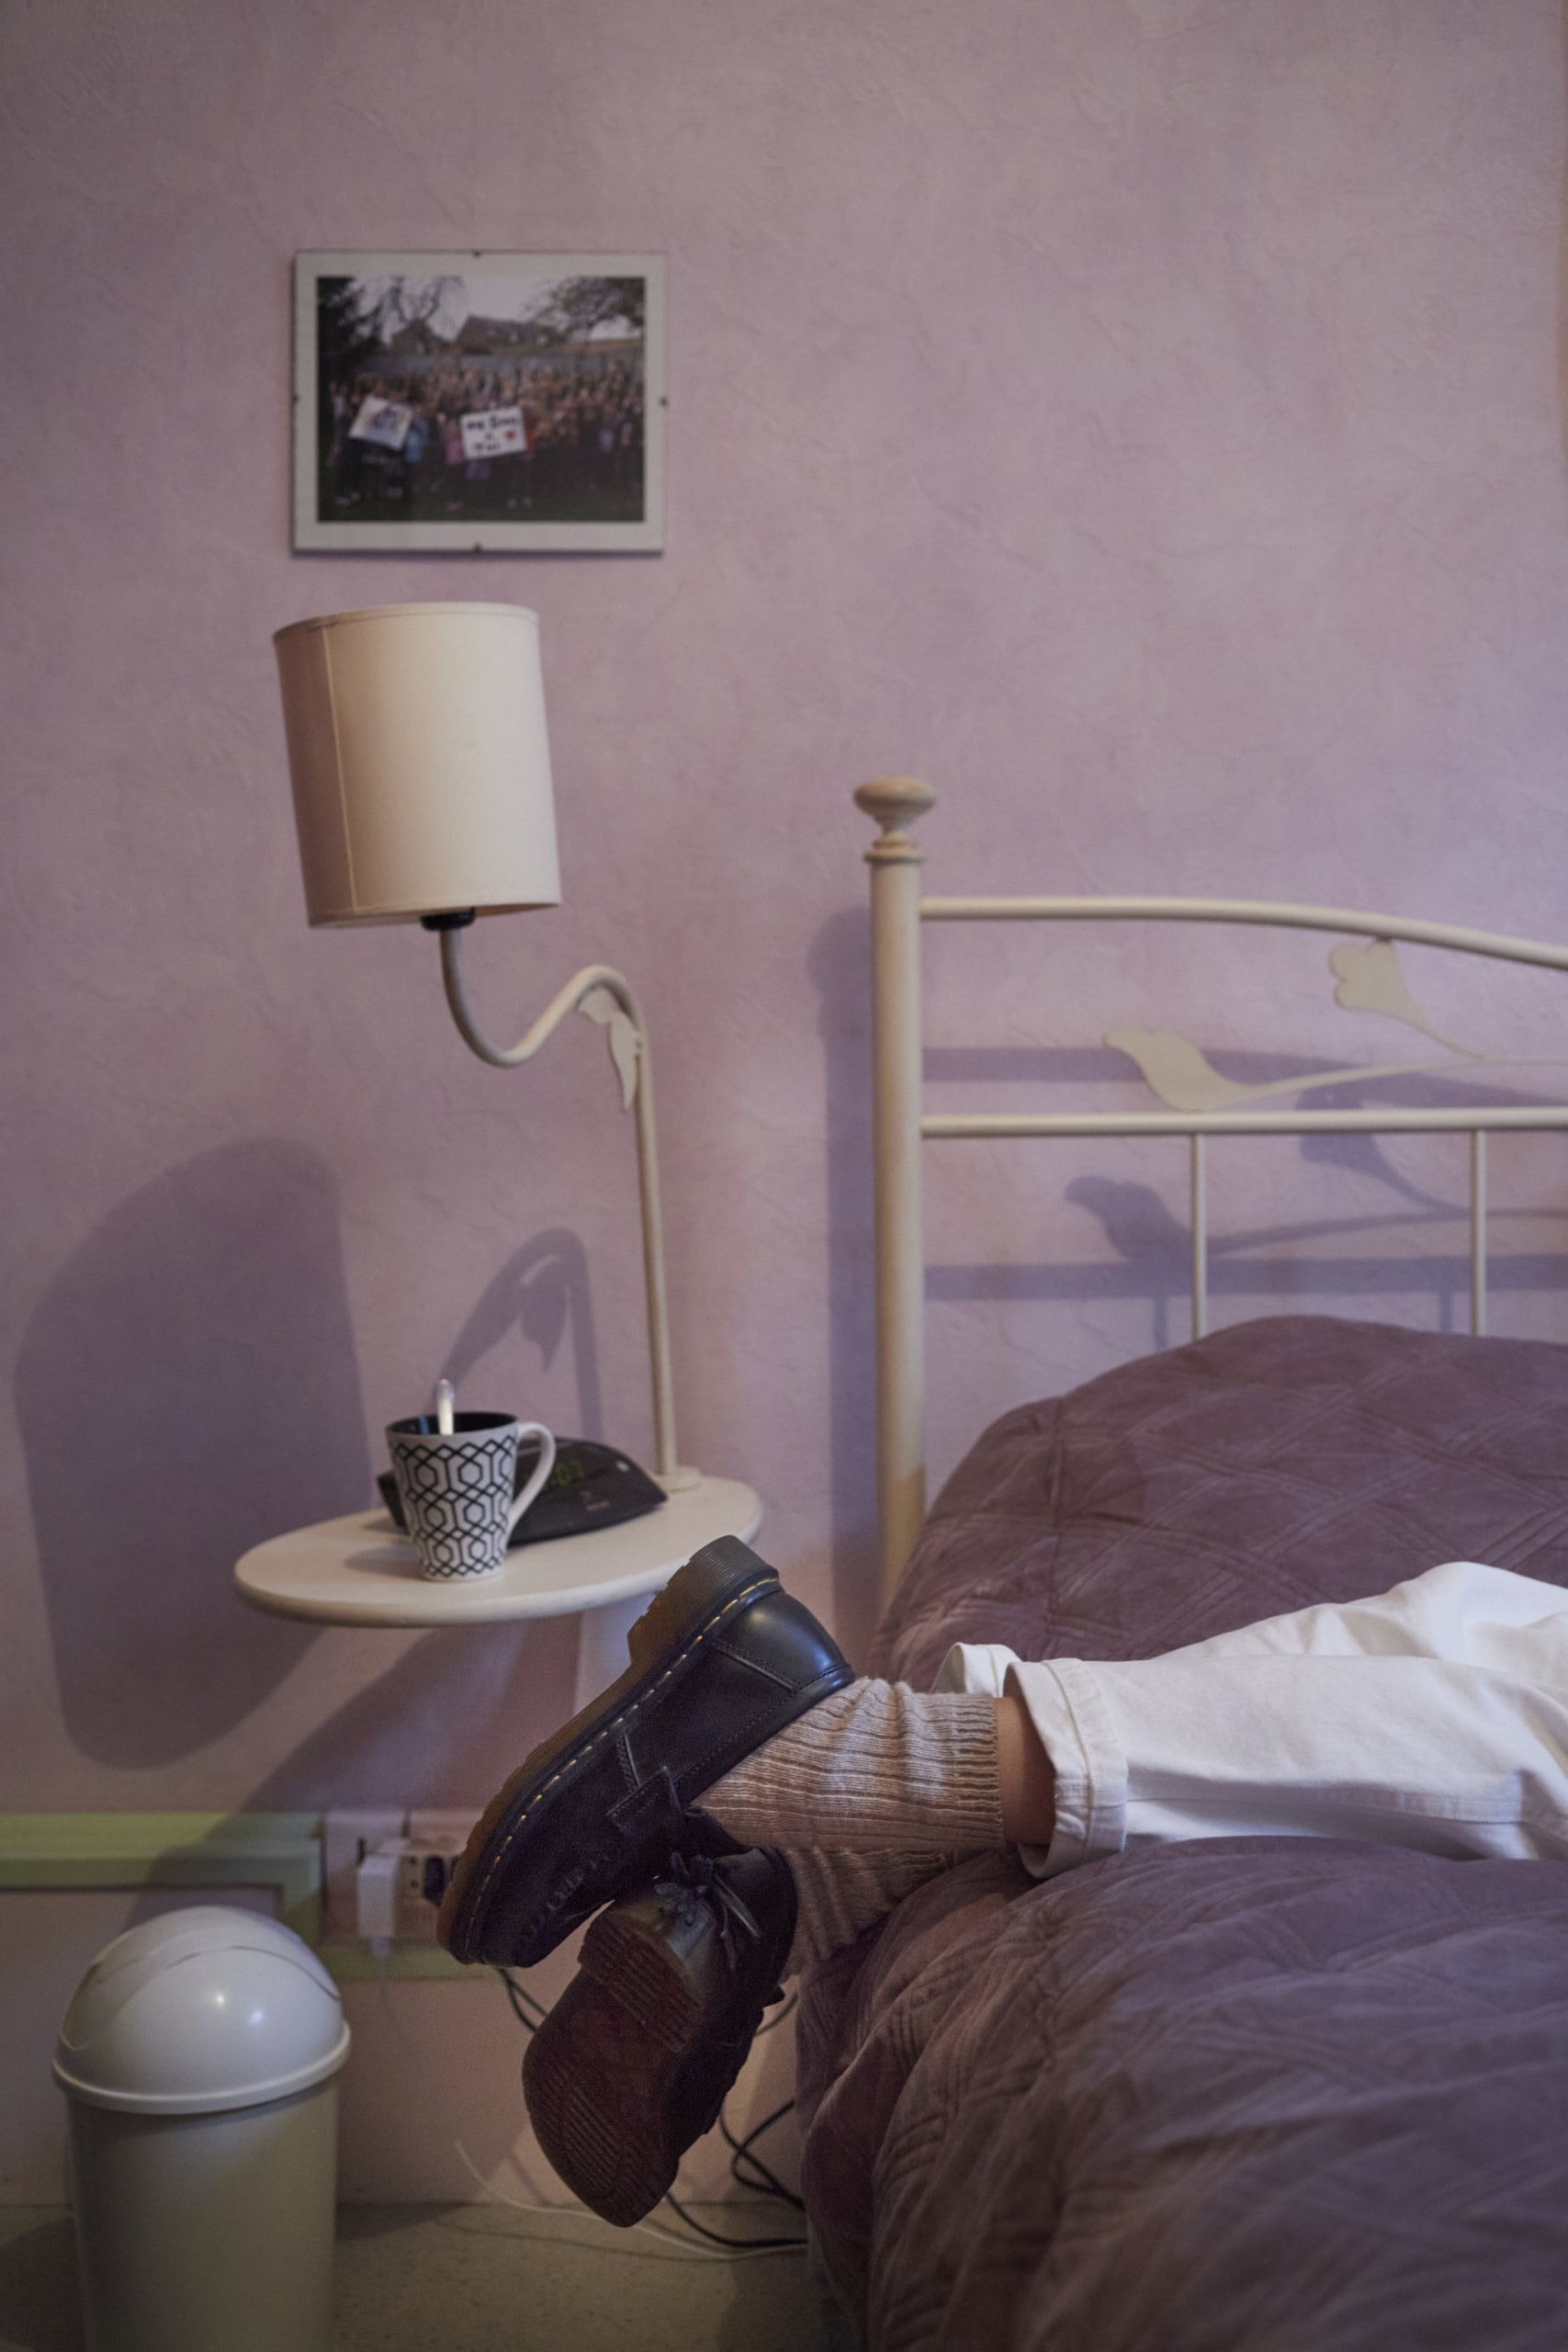 A persons legs on a bed in a purple bedroom, the person is wearing white pants and black shoes.